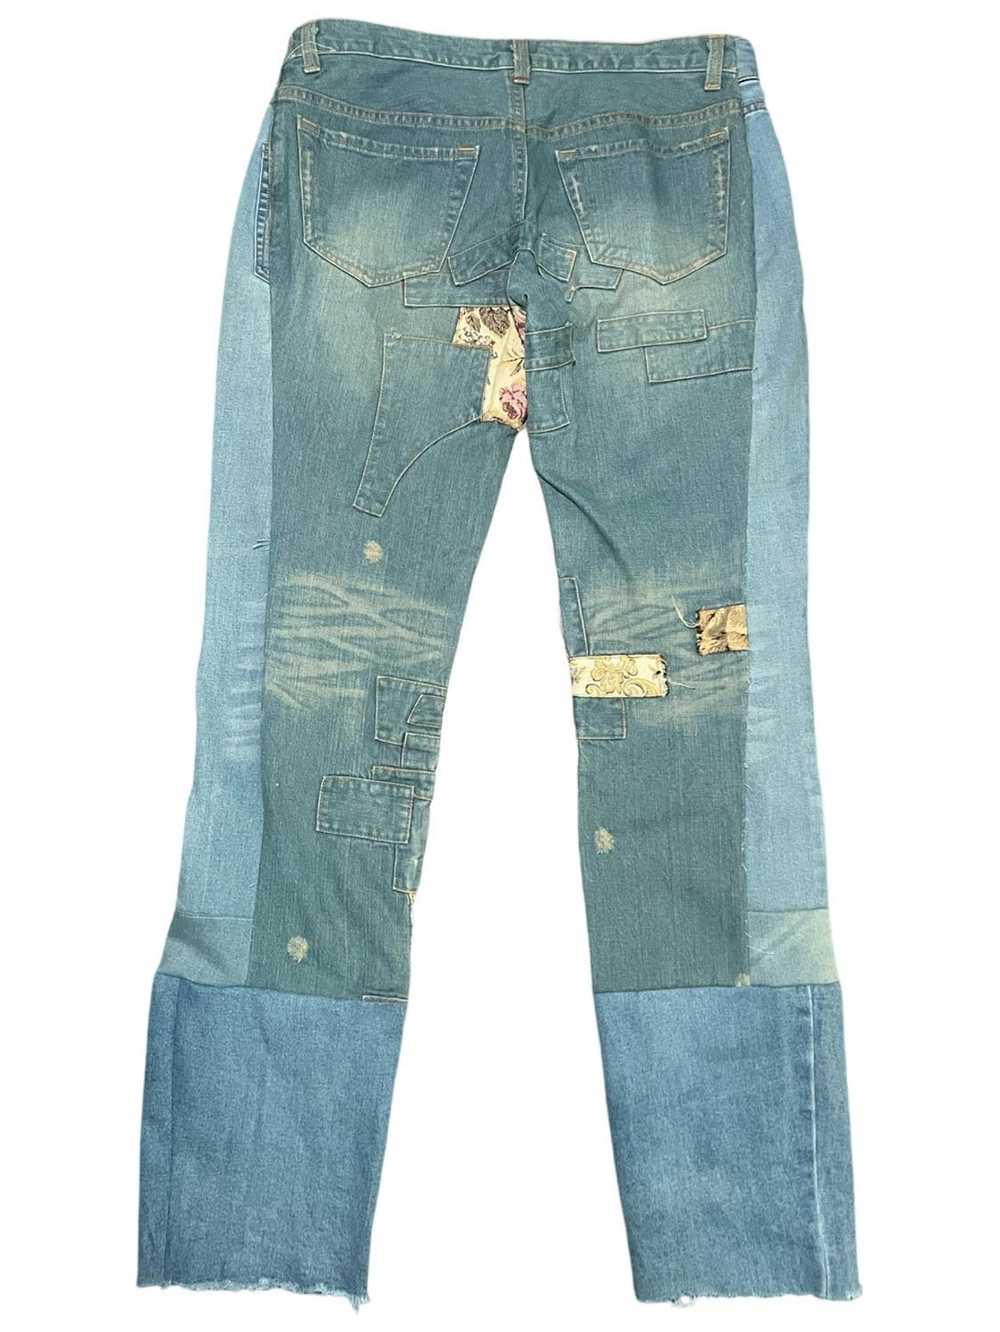 Issey Miyake Floral Patchwork Jeans - image 2